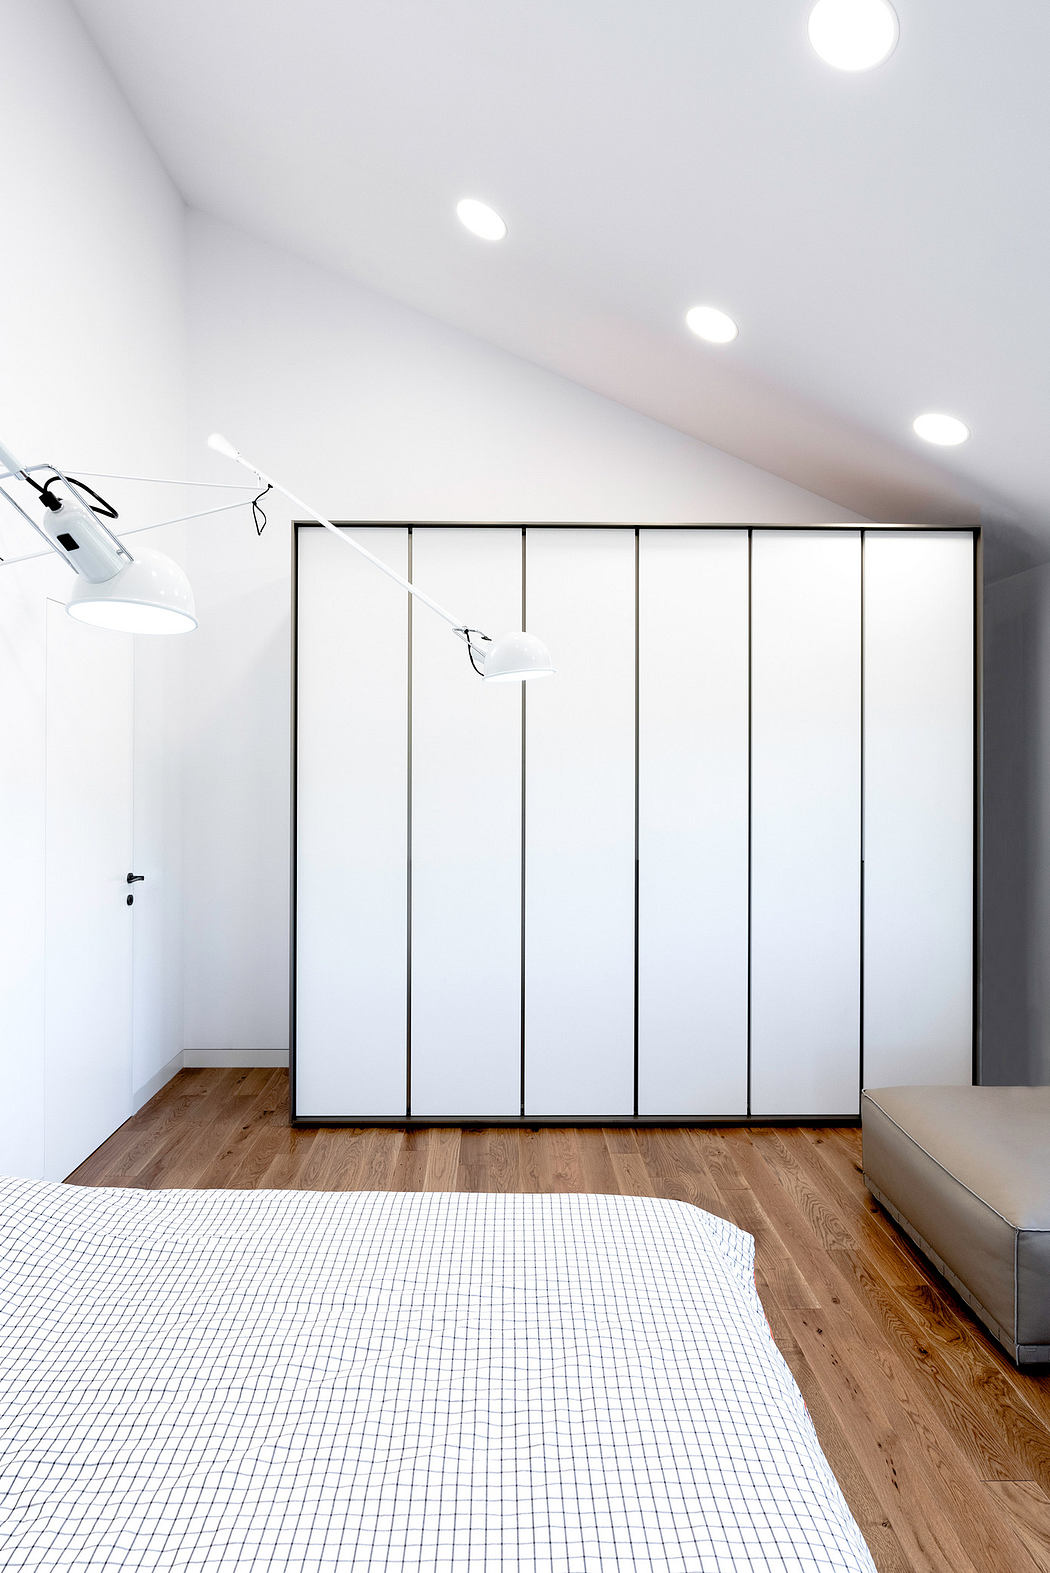 Minimalist bedroom with white walls, built-in closet, and wooden floor.